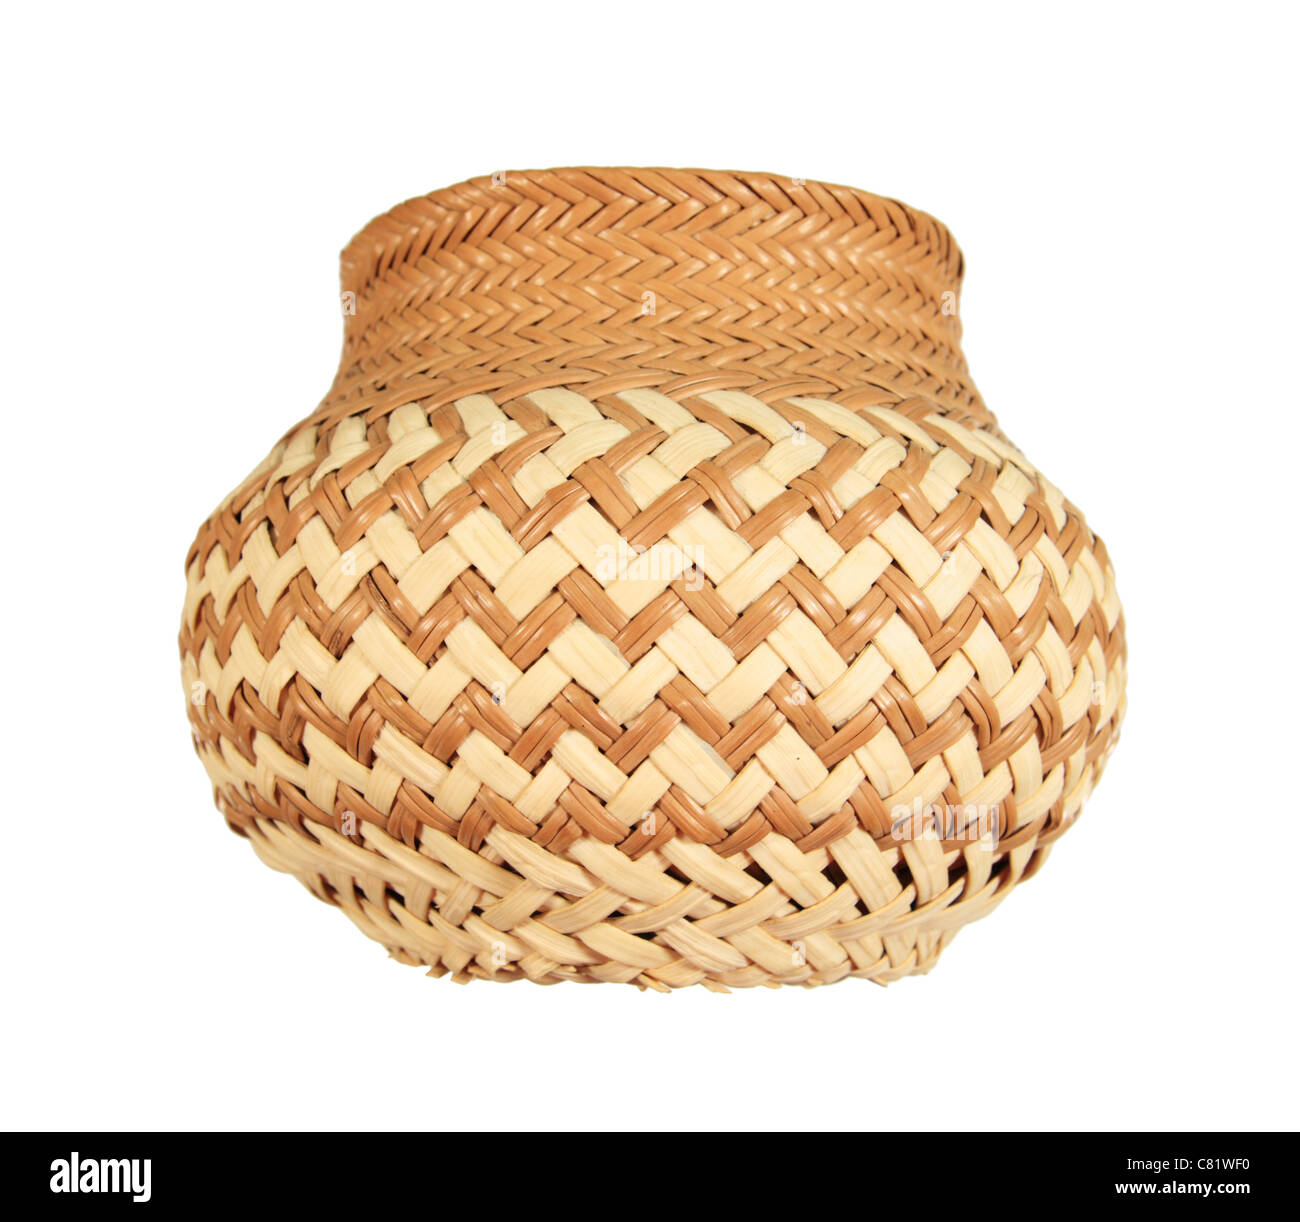 side view of brown and tan Mexican basket isolated on a white background Stock Photo